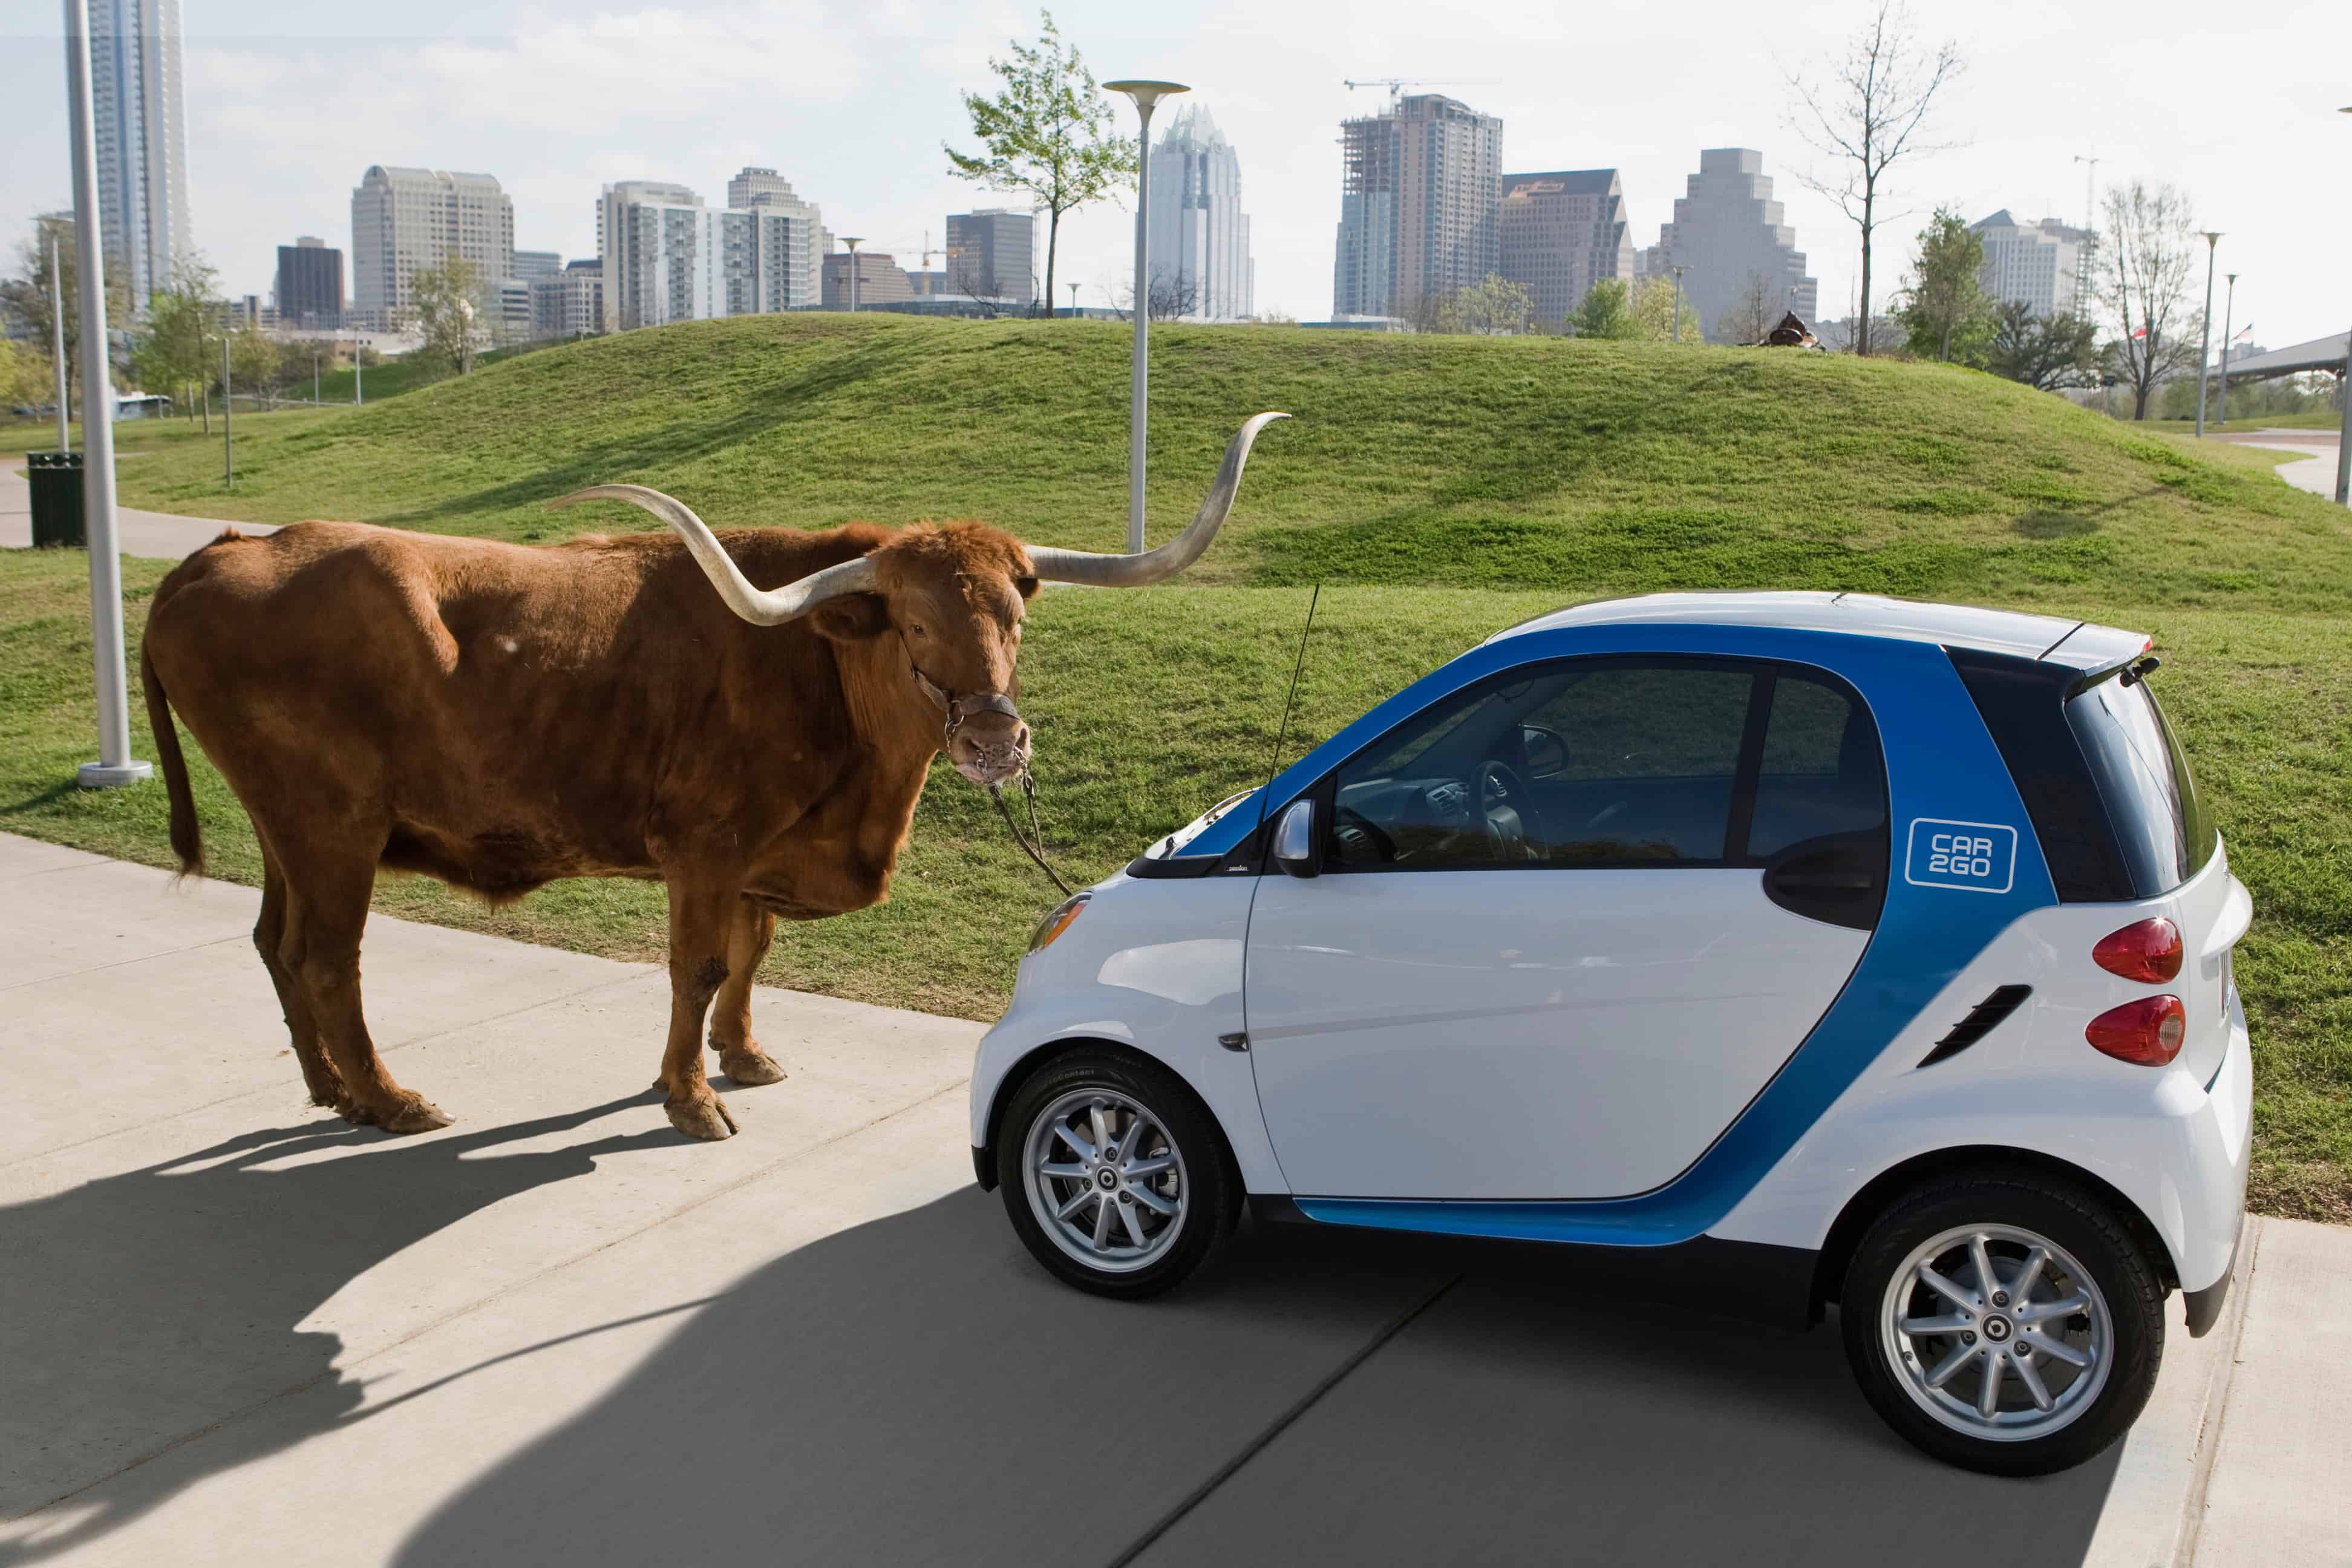 Question of the Day: What is your opinion of the Smart Car?